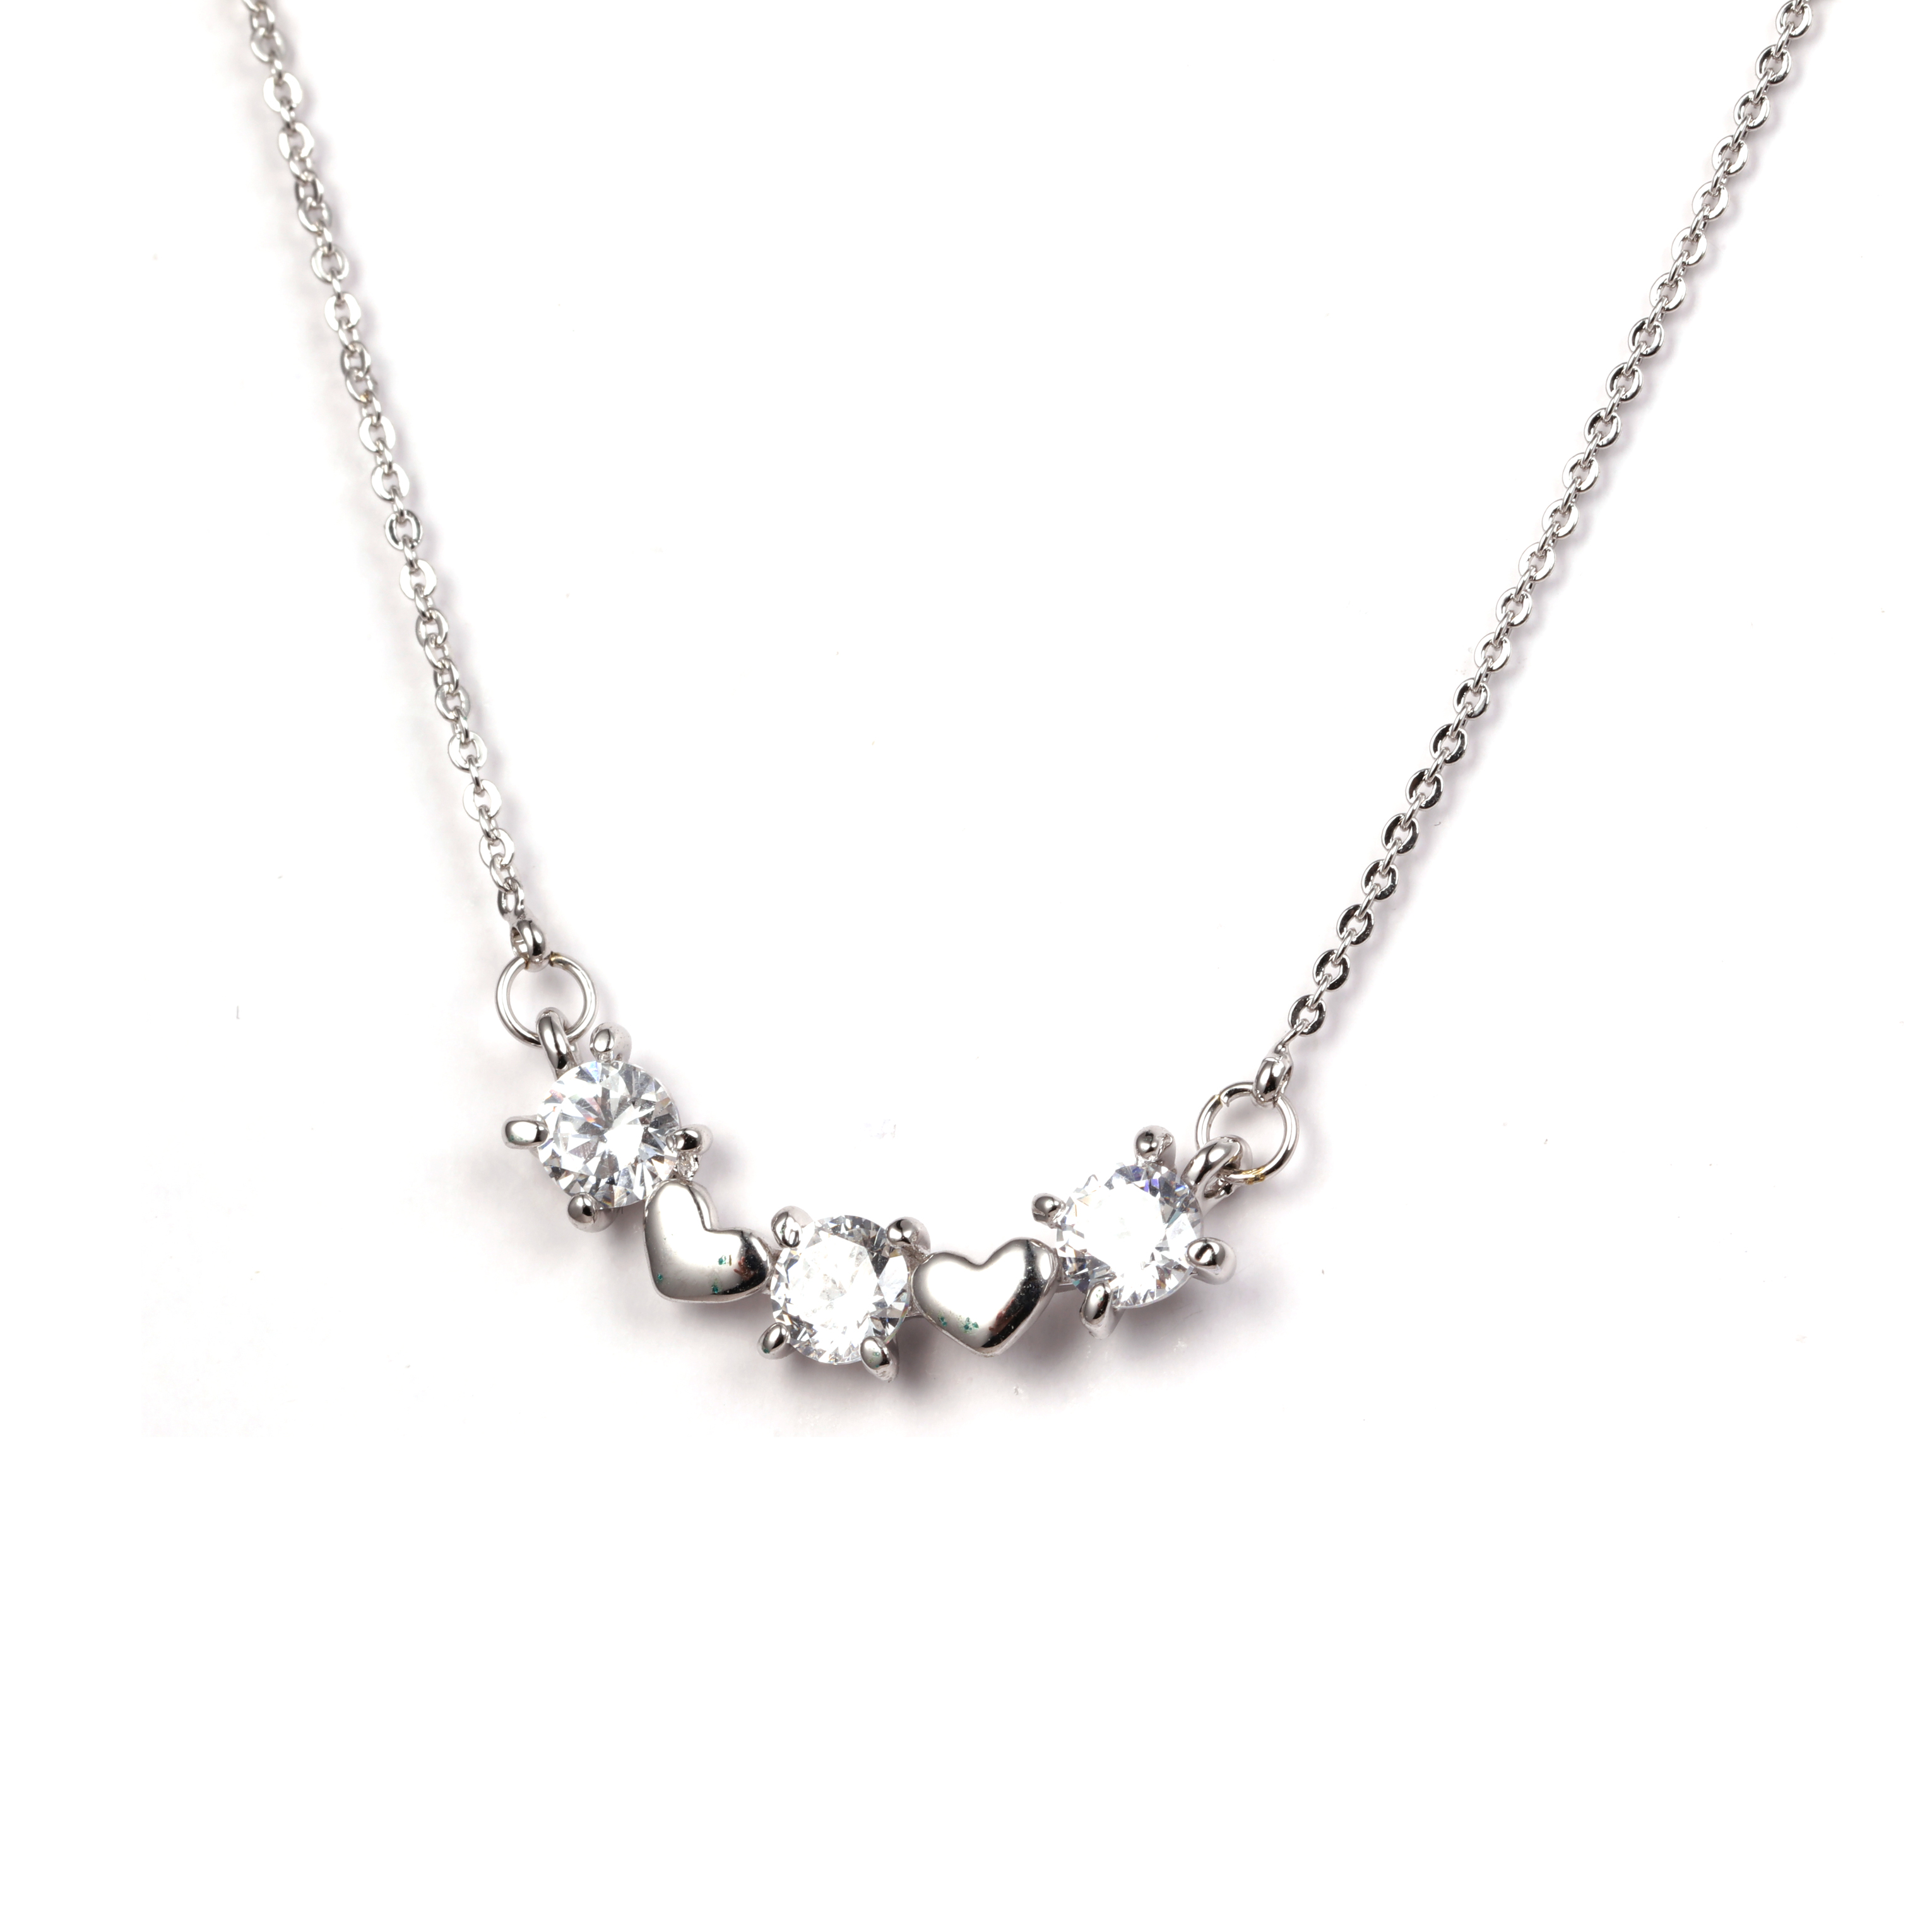 Rhodium Plated Cz Necklace